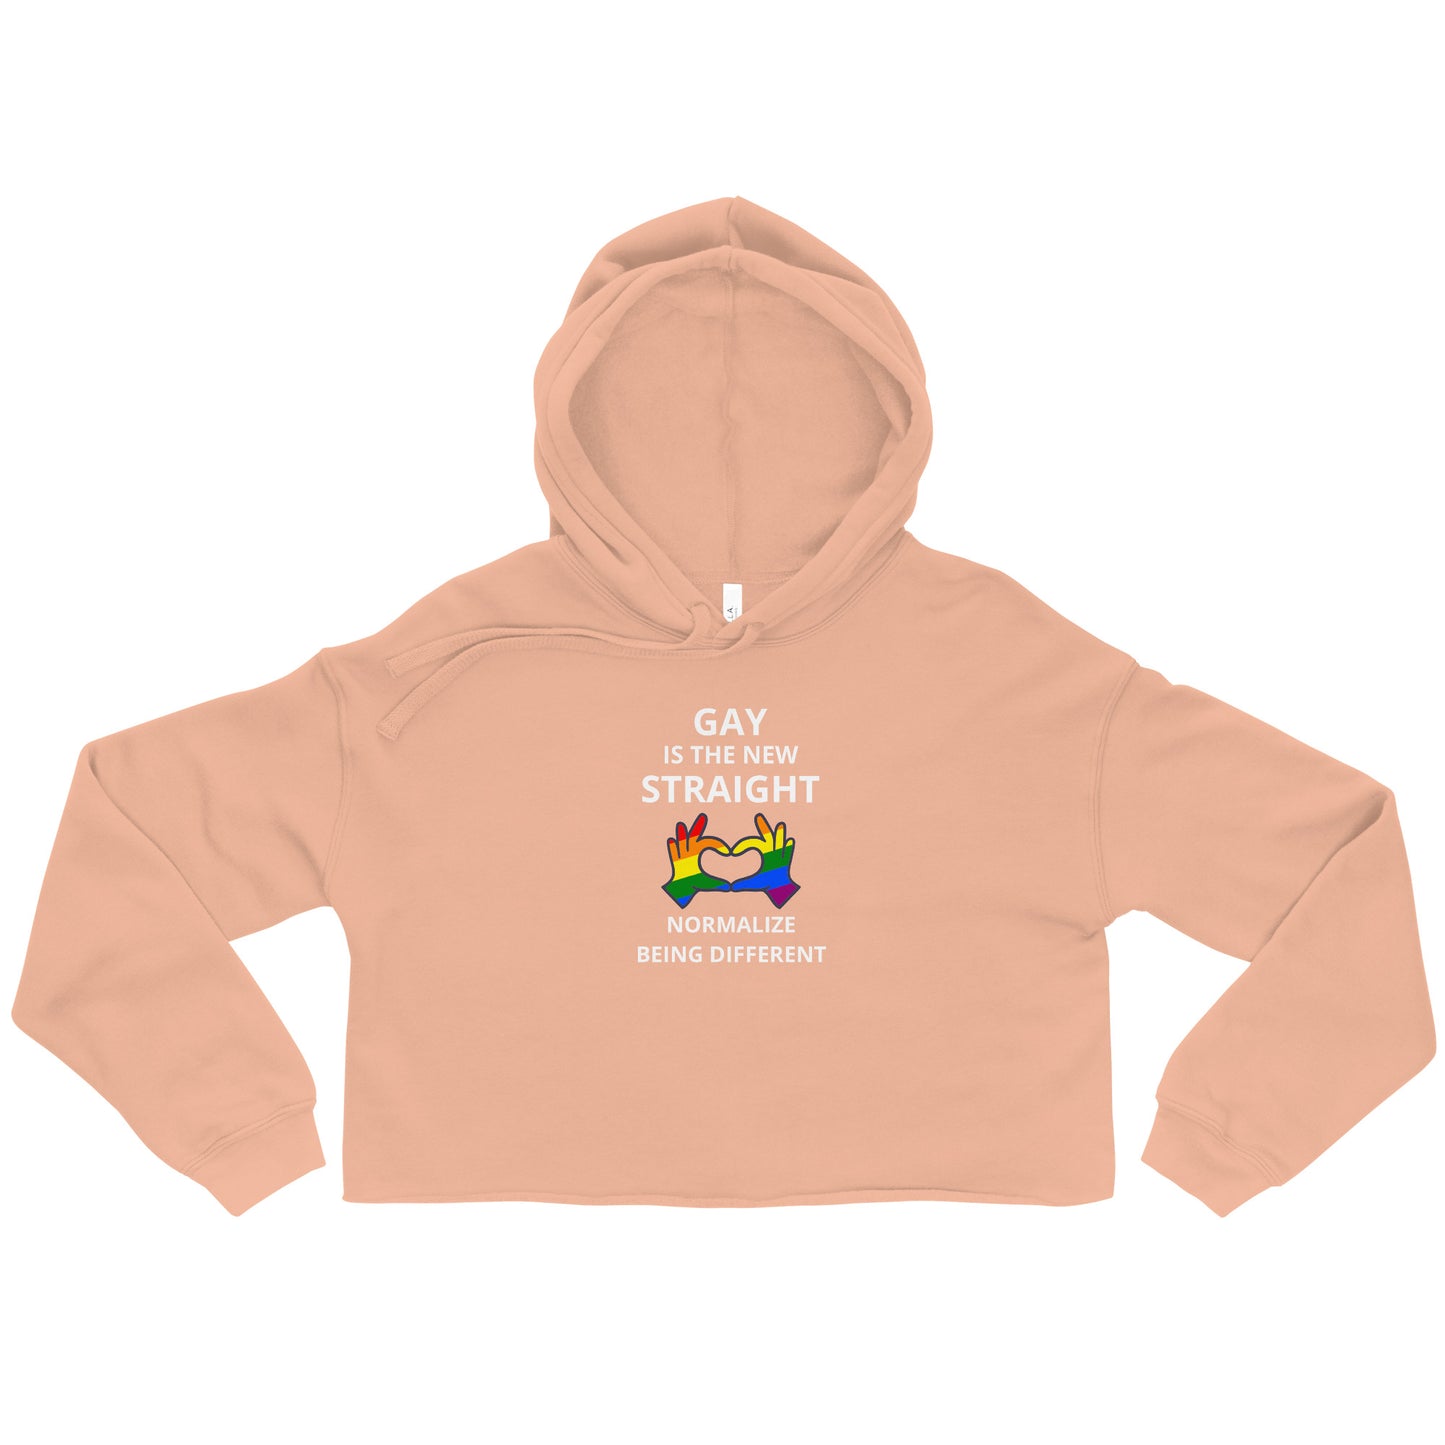 Gay Is The New Straight Crop Hoodie W/ Normalize Being Different